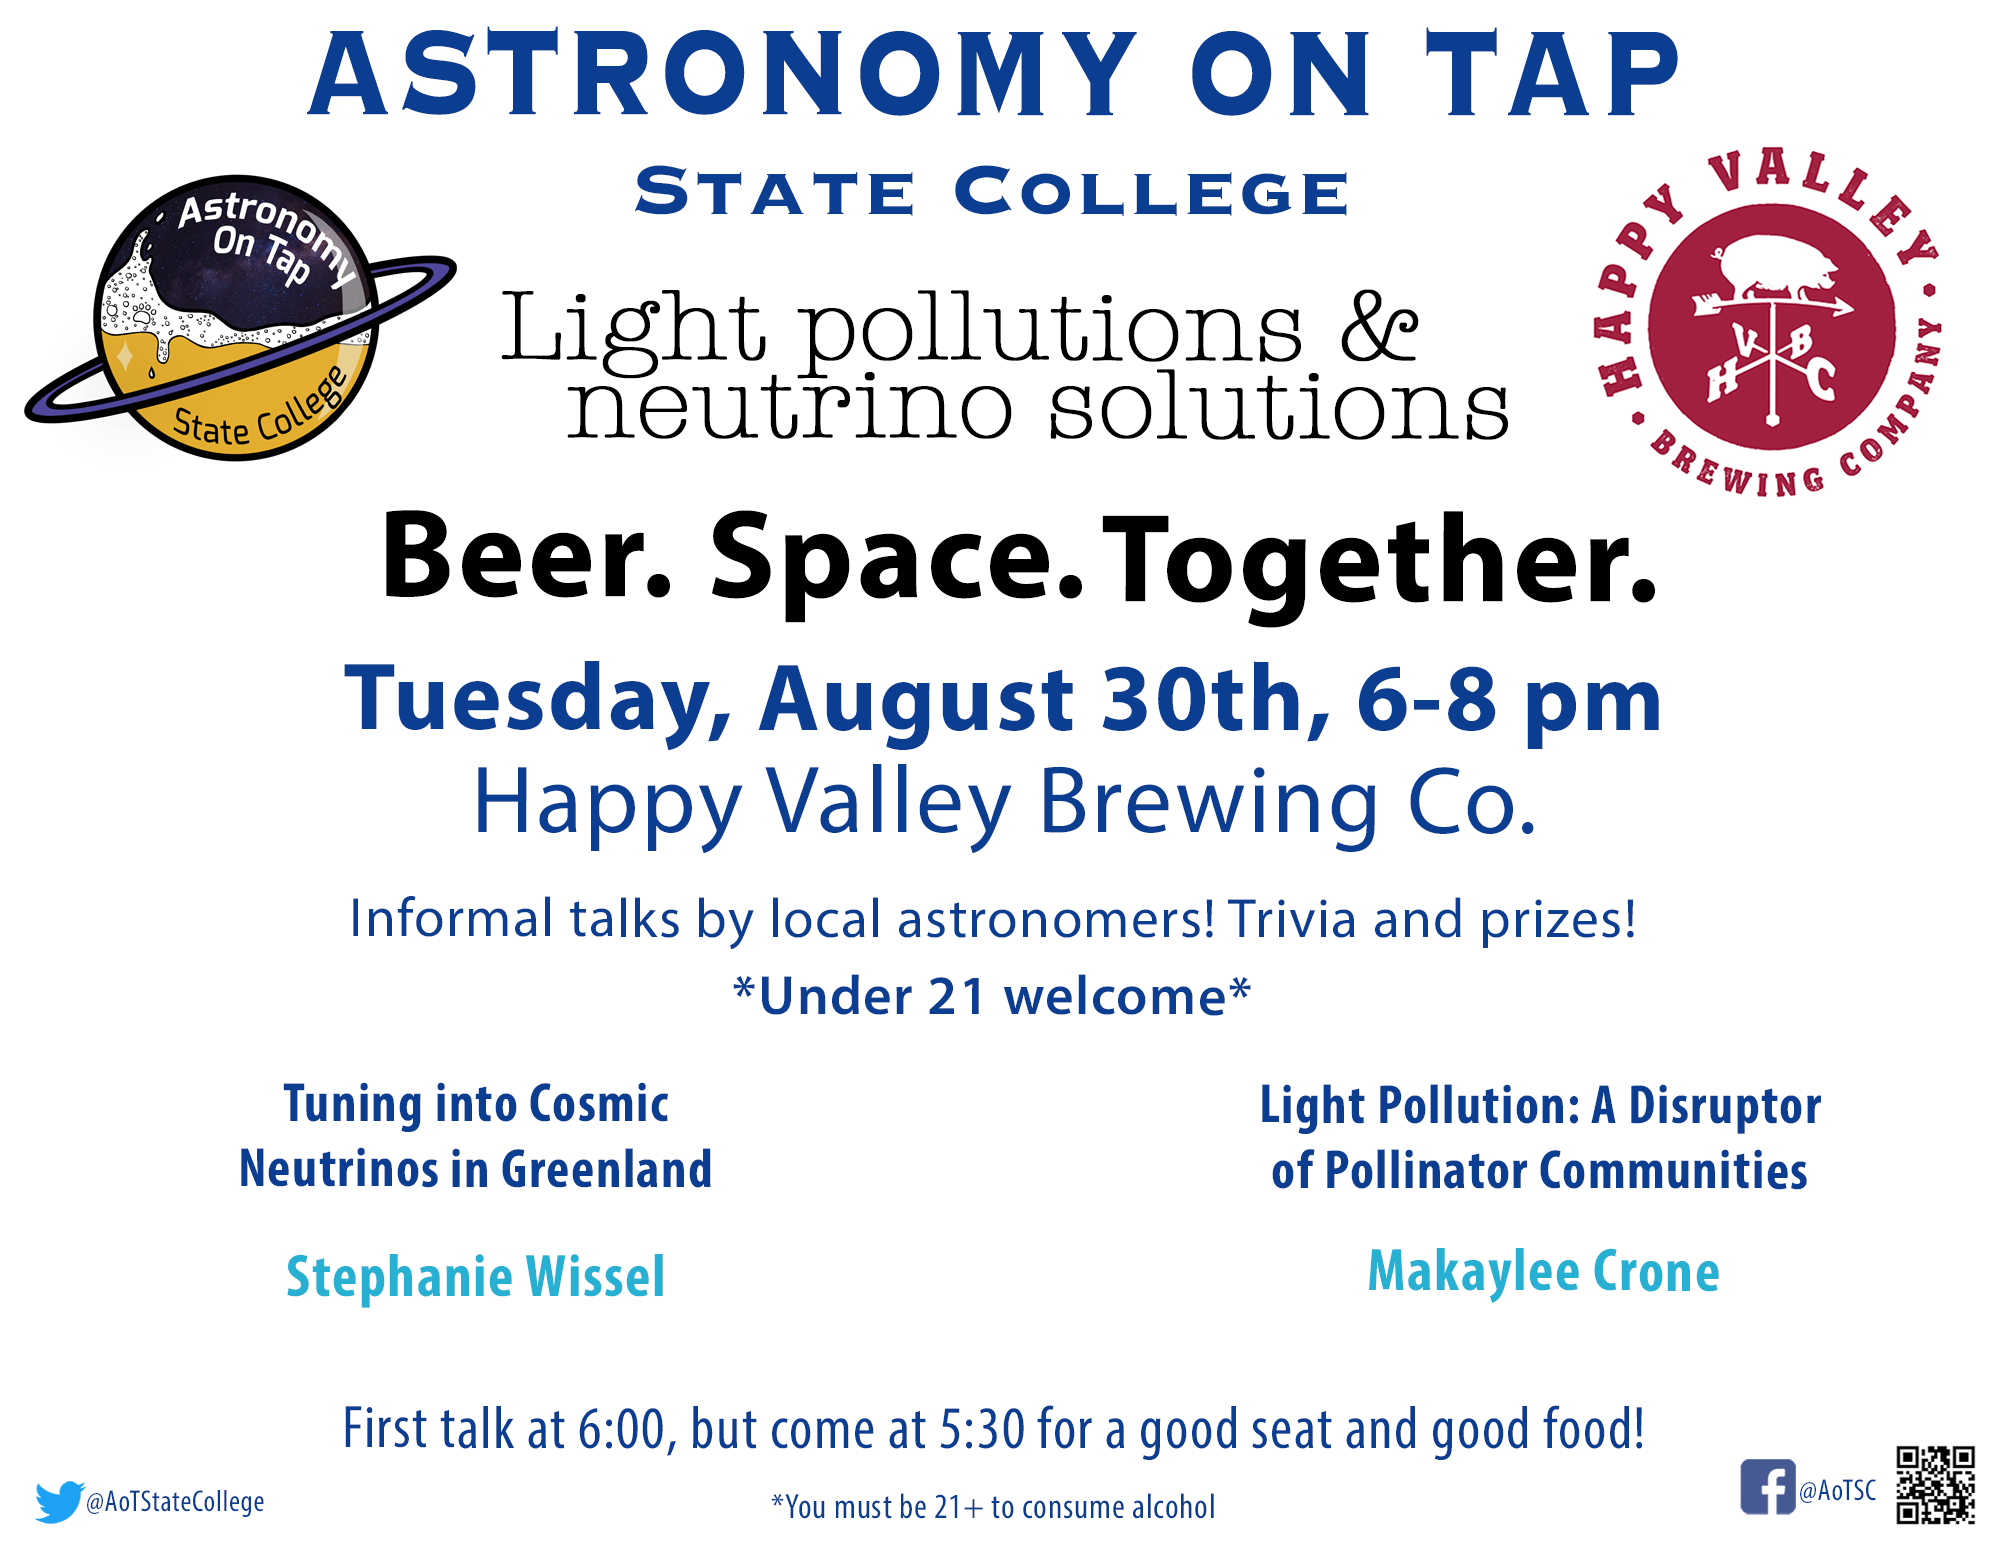 Astronomy on Tap State College at Happy Valley Brewing Company on August 30 from 6-8 pm